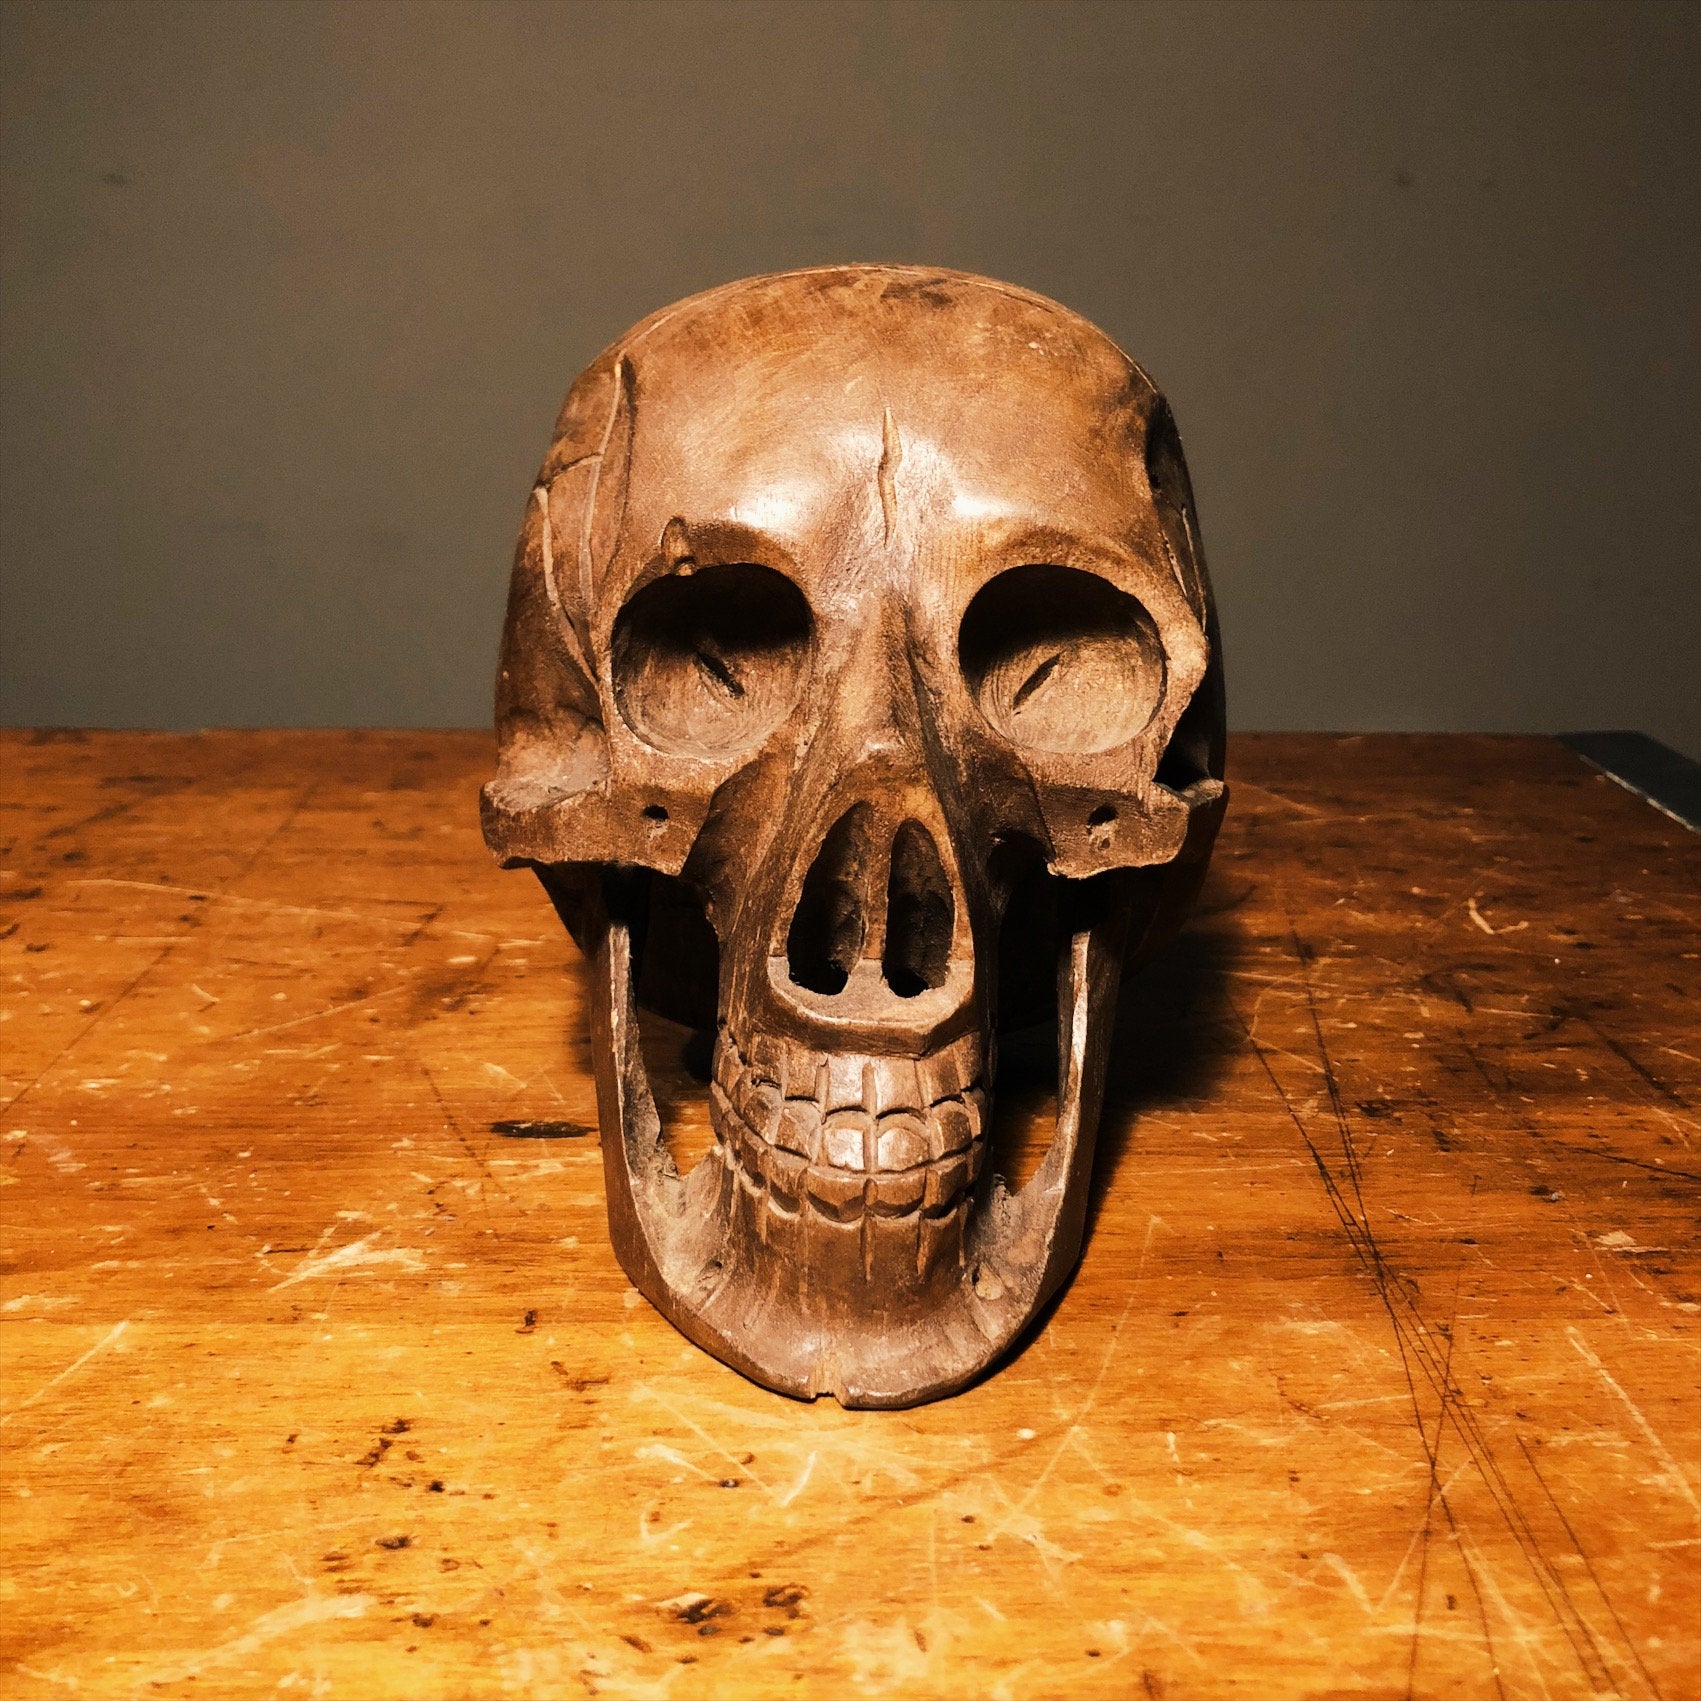 Vintage Wood Carved Skull - India - 1970s? - Hand Carved - Life Size - Ornate Carving - Oddity - Unusual Art Carvings - Creepy Carving